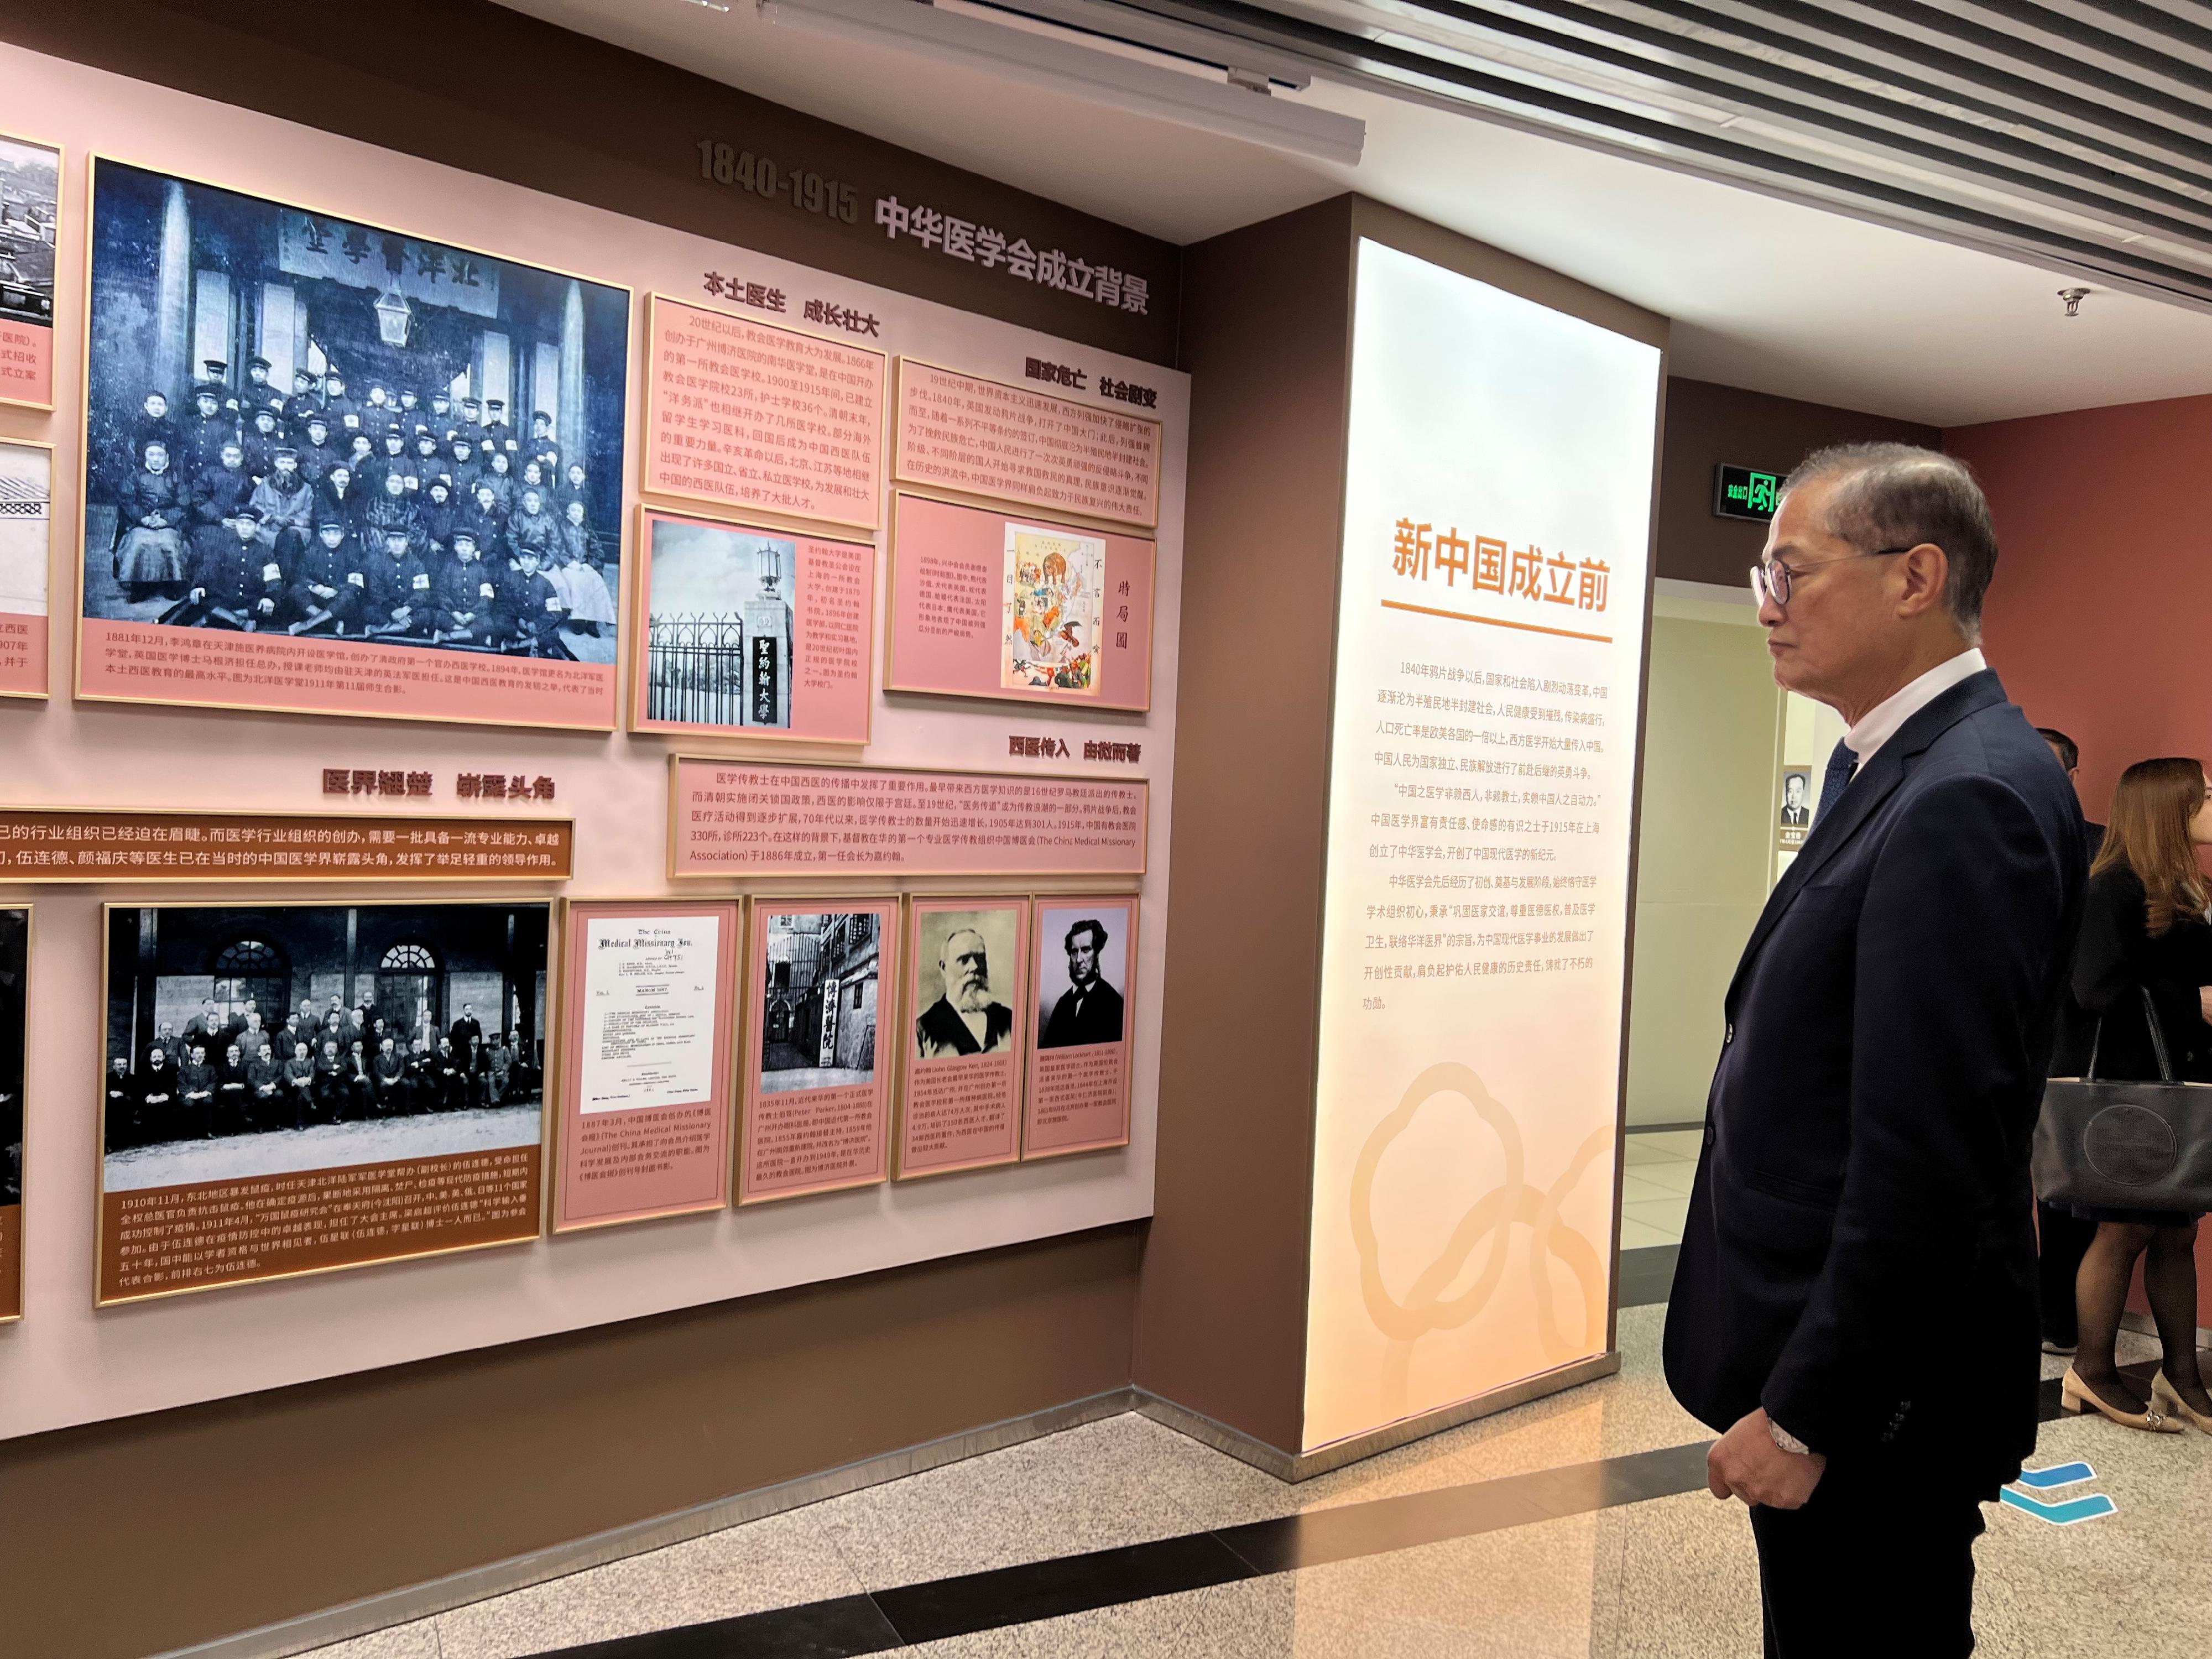 The Secretary for Health, Professor Lo Chung-mau, and his delegation visited the Chinese Medical Association in Beijing this afternoon (November 6) and toured around its exhibition gallery.